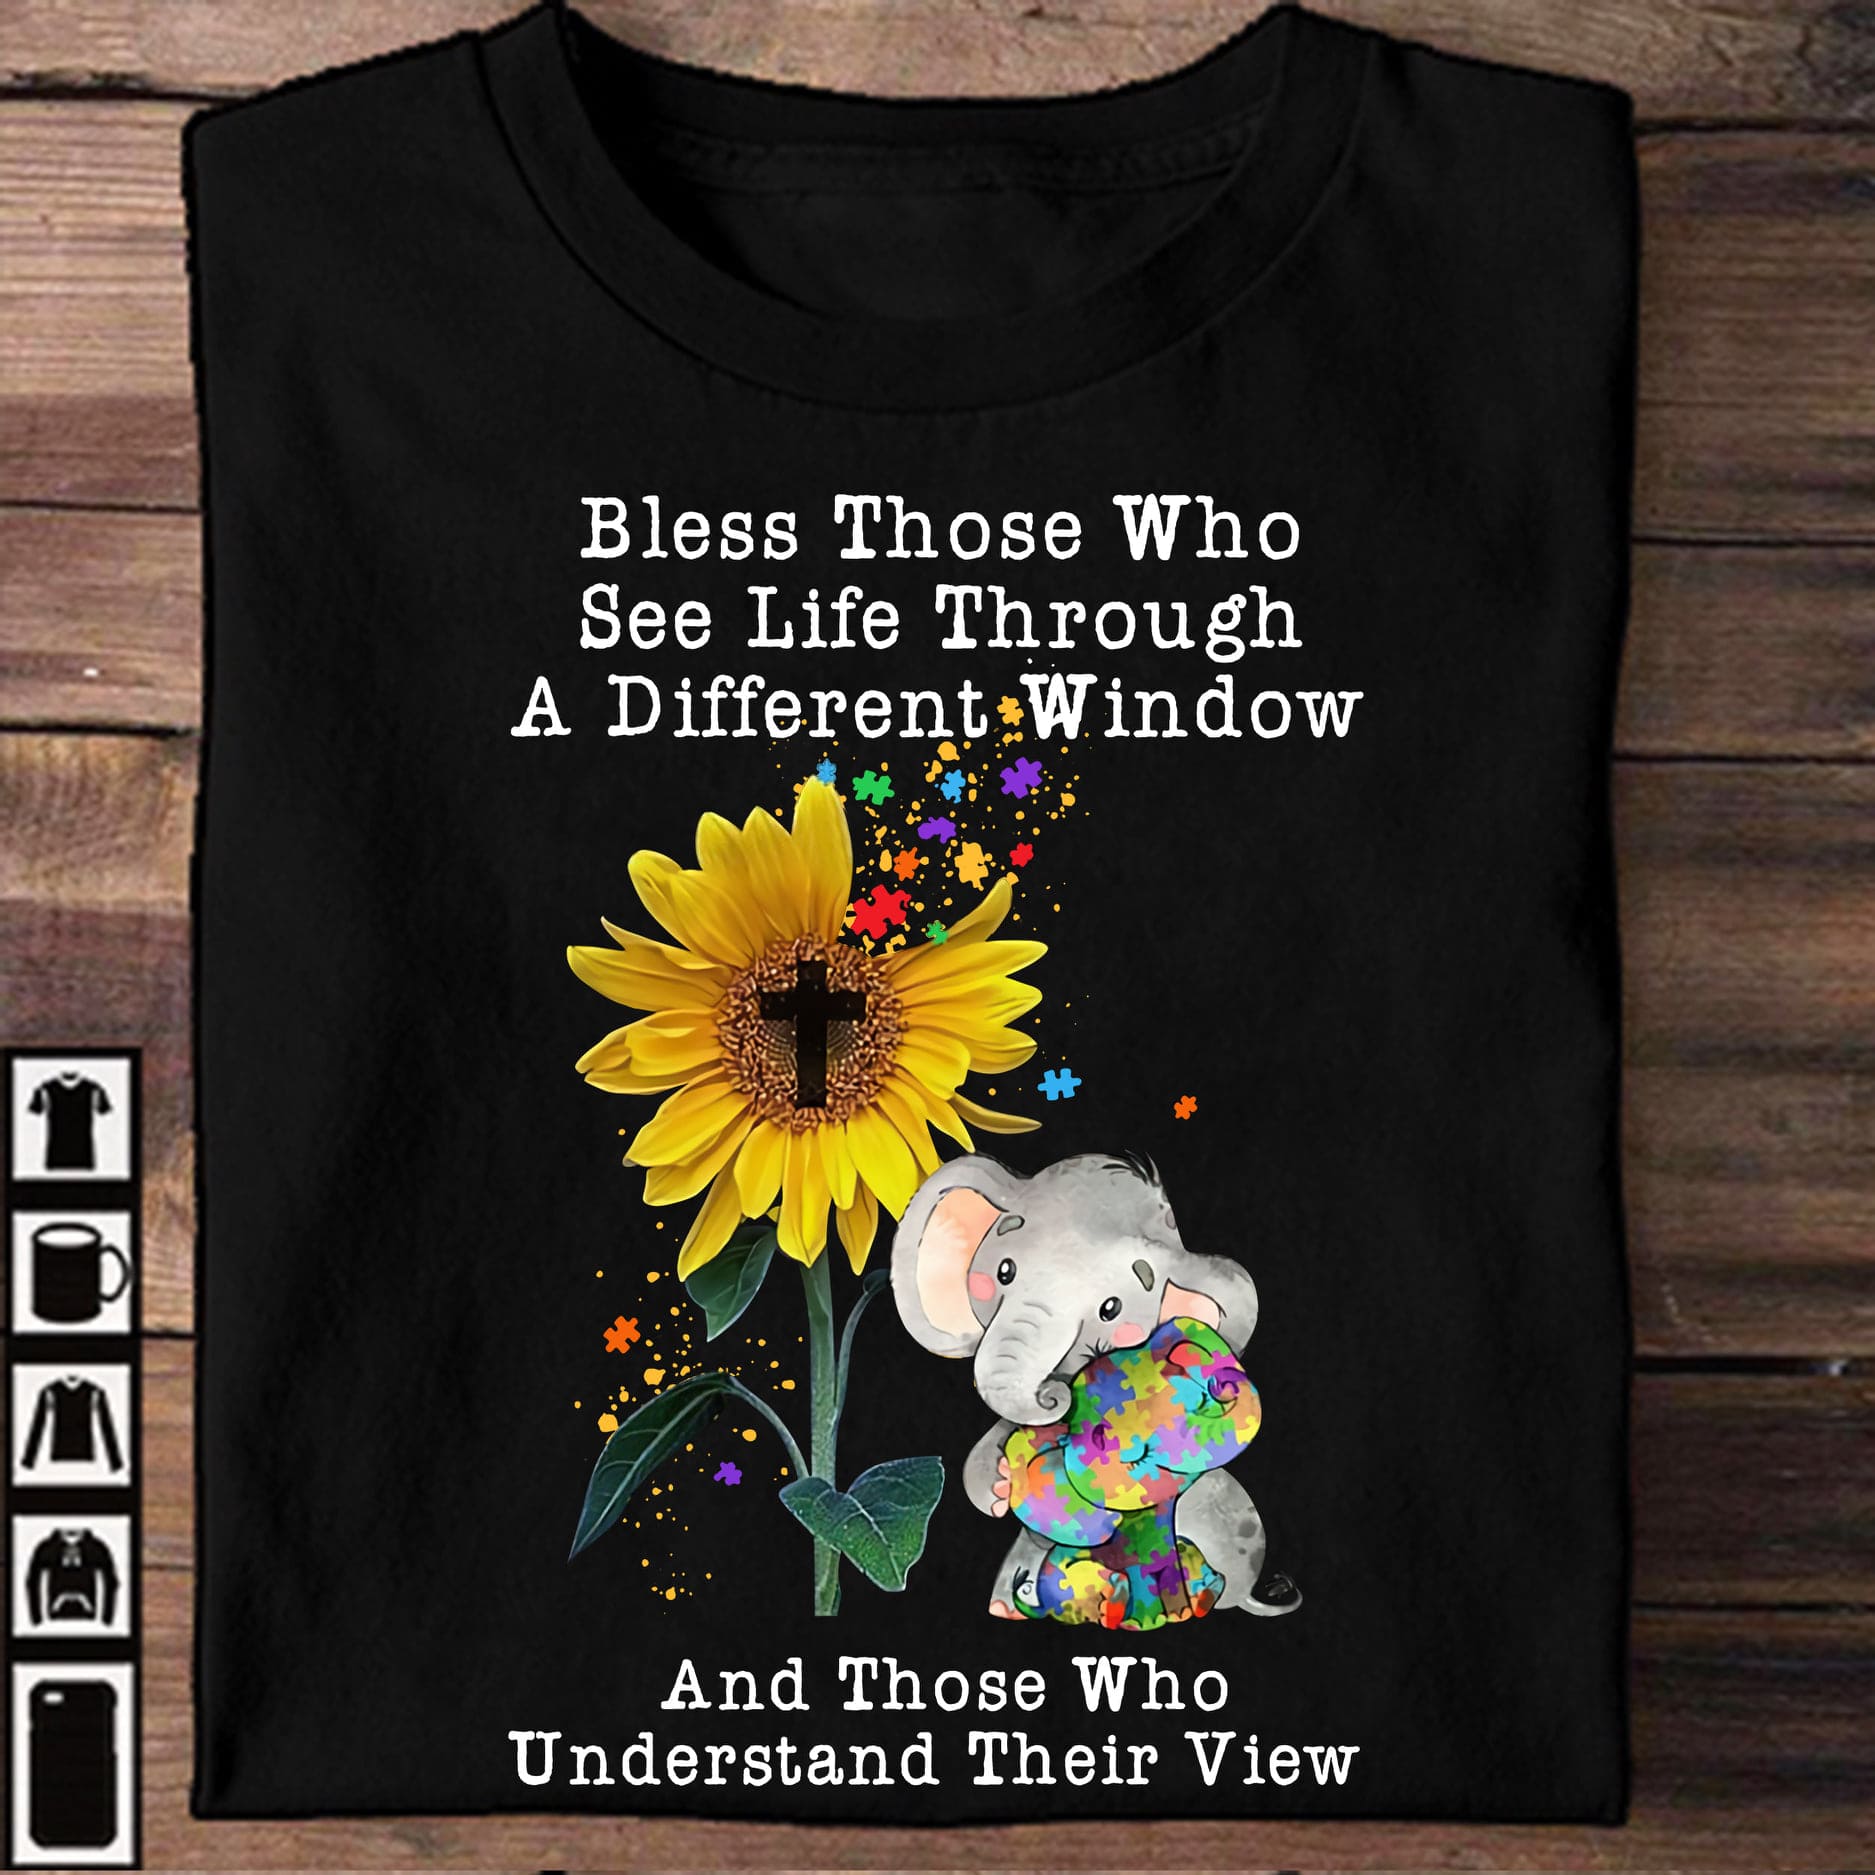 Bless those who see life through a different window and those who understand their view - Autism awareness, elephant family autism